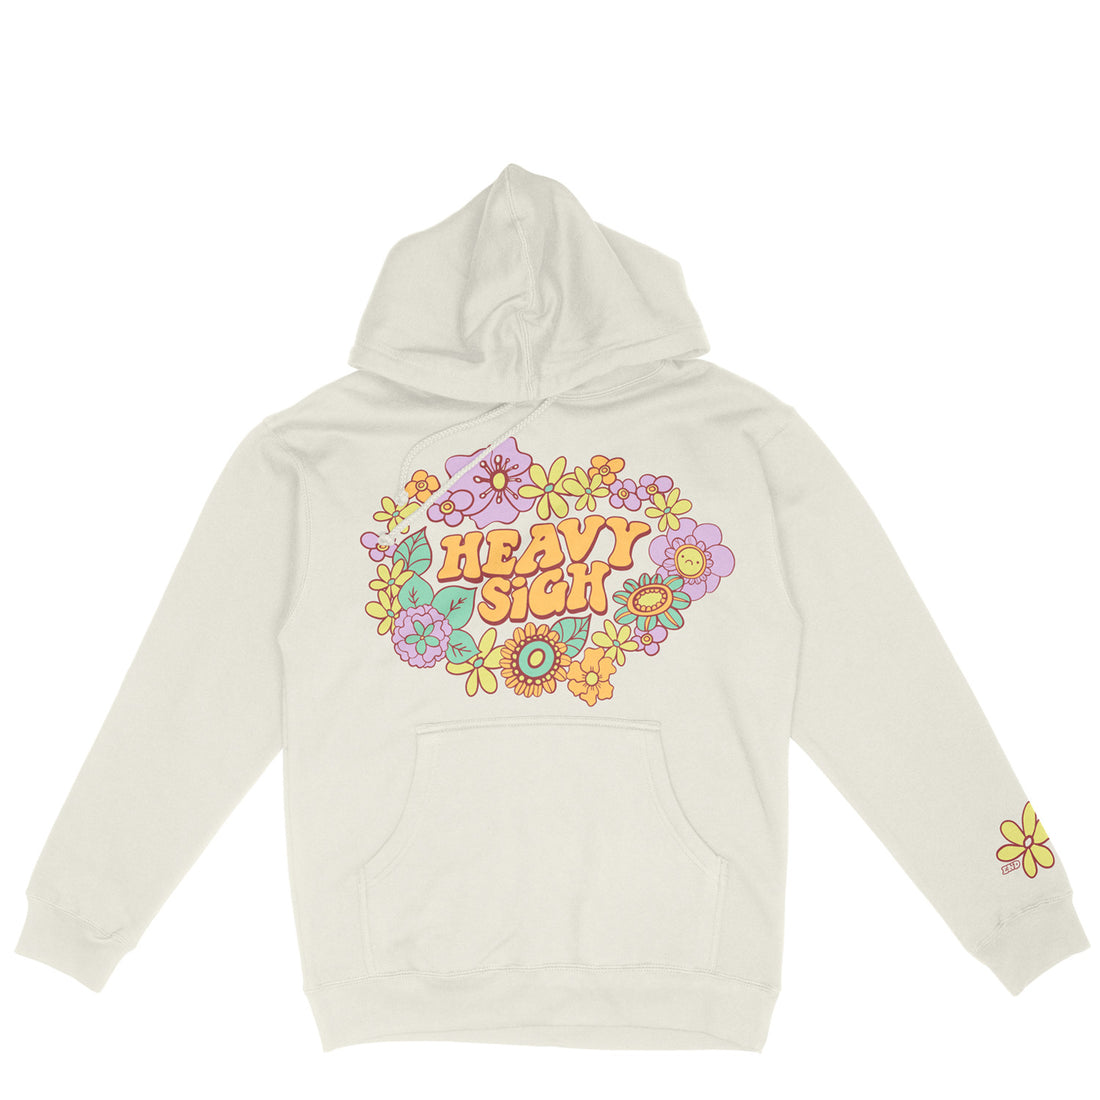 Emo’s Not Dead, Band Merch, Heavy Sigh Hoodie